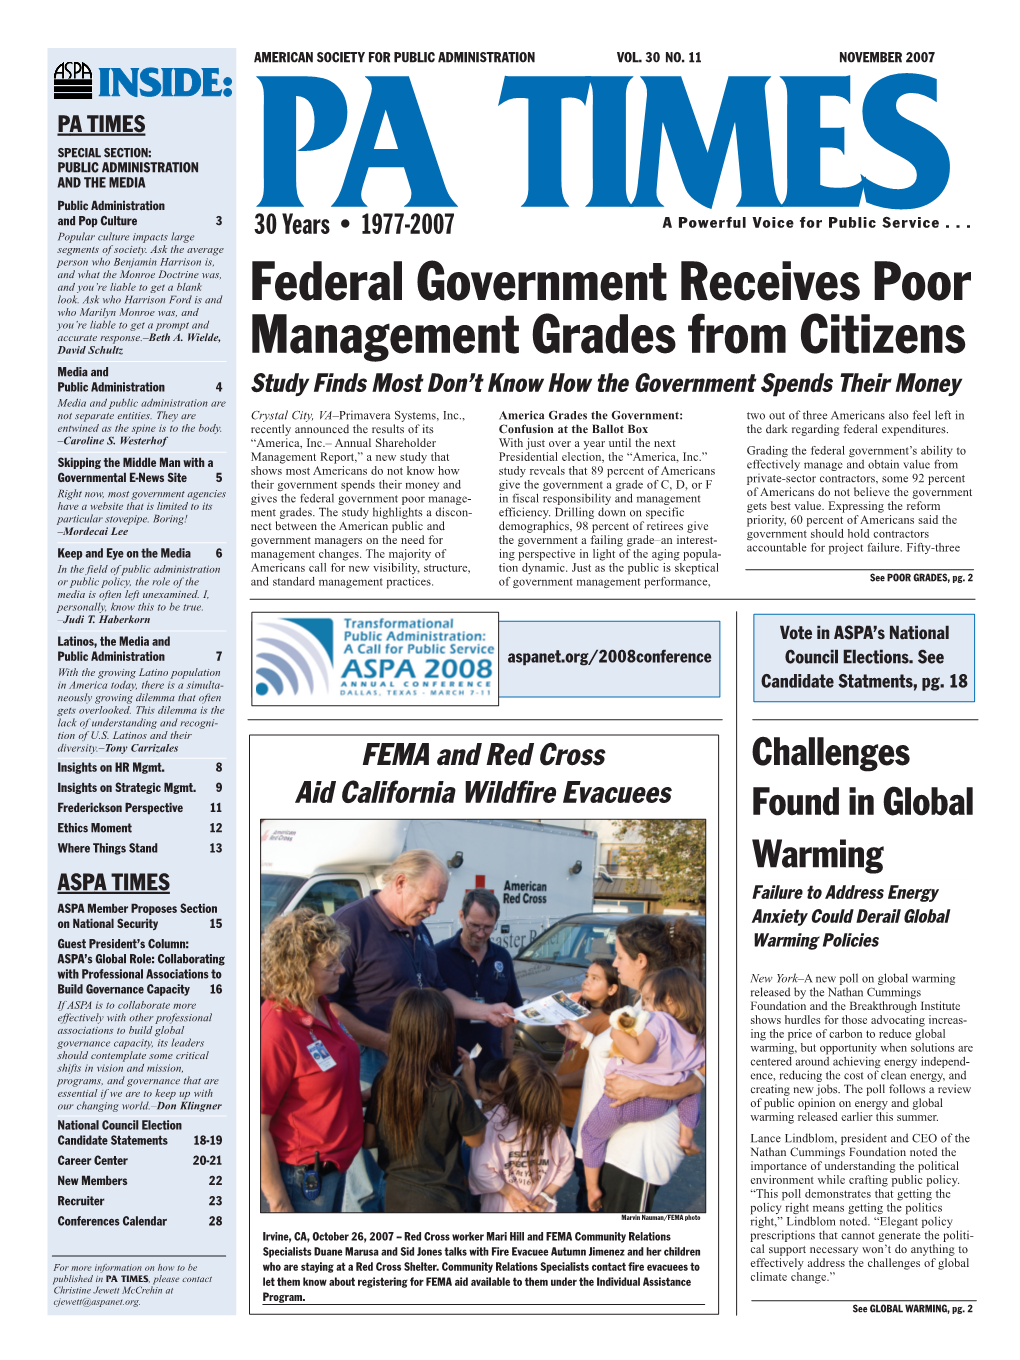 Federal Government Receives Poor Management Grades from Citizens